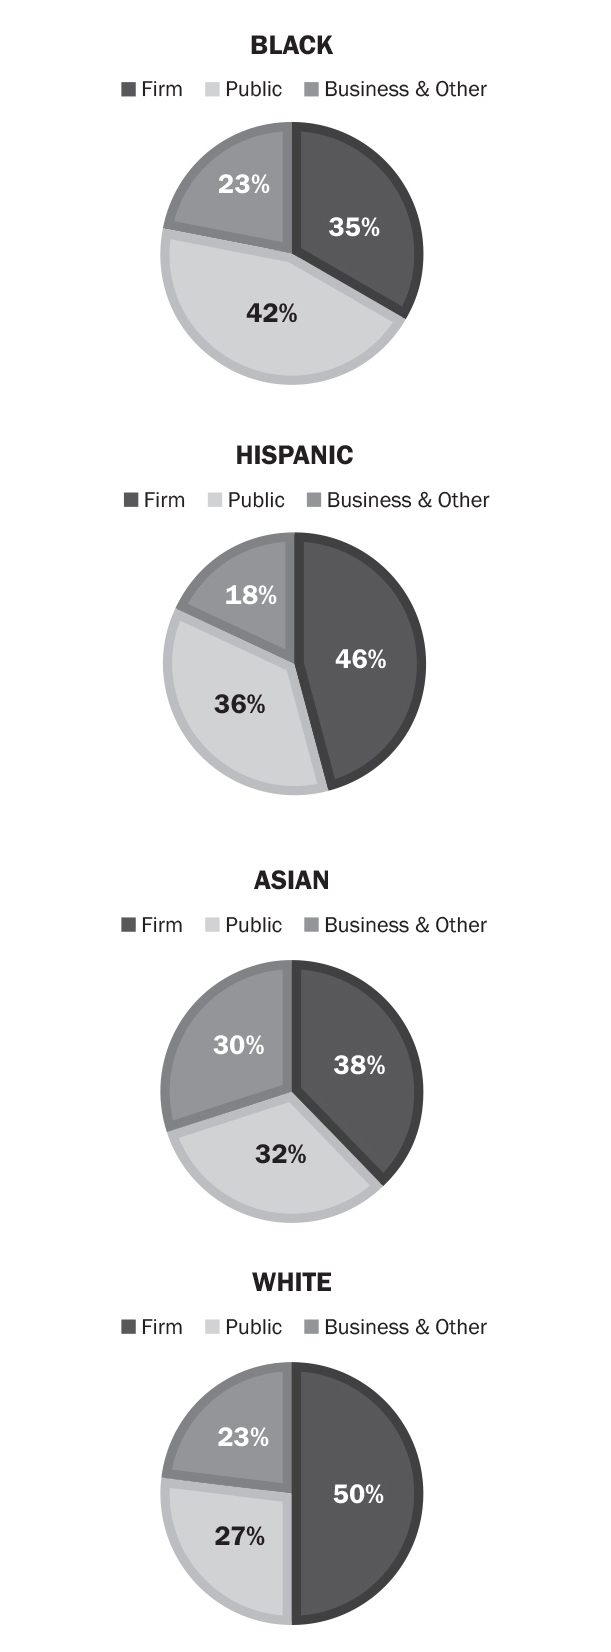 These pie charts show participation in three labor sectors (firm, public, and business & other) for the four major racial groups commonly identified in the United States (Black, Hispanic, Asian, and White) in Wave 3. The pie chart for the Black racial group shows 35% participation in the firm (private) sector, 42% in the public sector, and 23% in business & other. The pie chart for the Hispanic racial group shows 46% participation in the firm (private) sector, 36% in the public sector, and 18% in business & other. The pie chart for the Asian racial group shows 38% participation in the firm (private) sector, 32% in the public sector, and 30% in business & other. The pie chart for the White racial group shows 50% participation in the firm (private) sector, 27% in the public sector, and 23% in business & other.